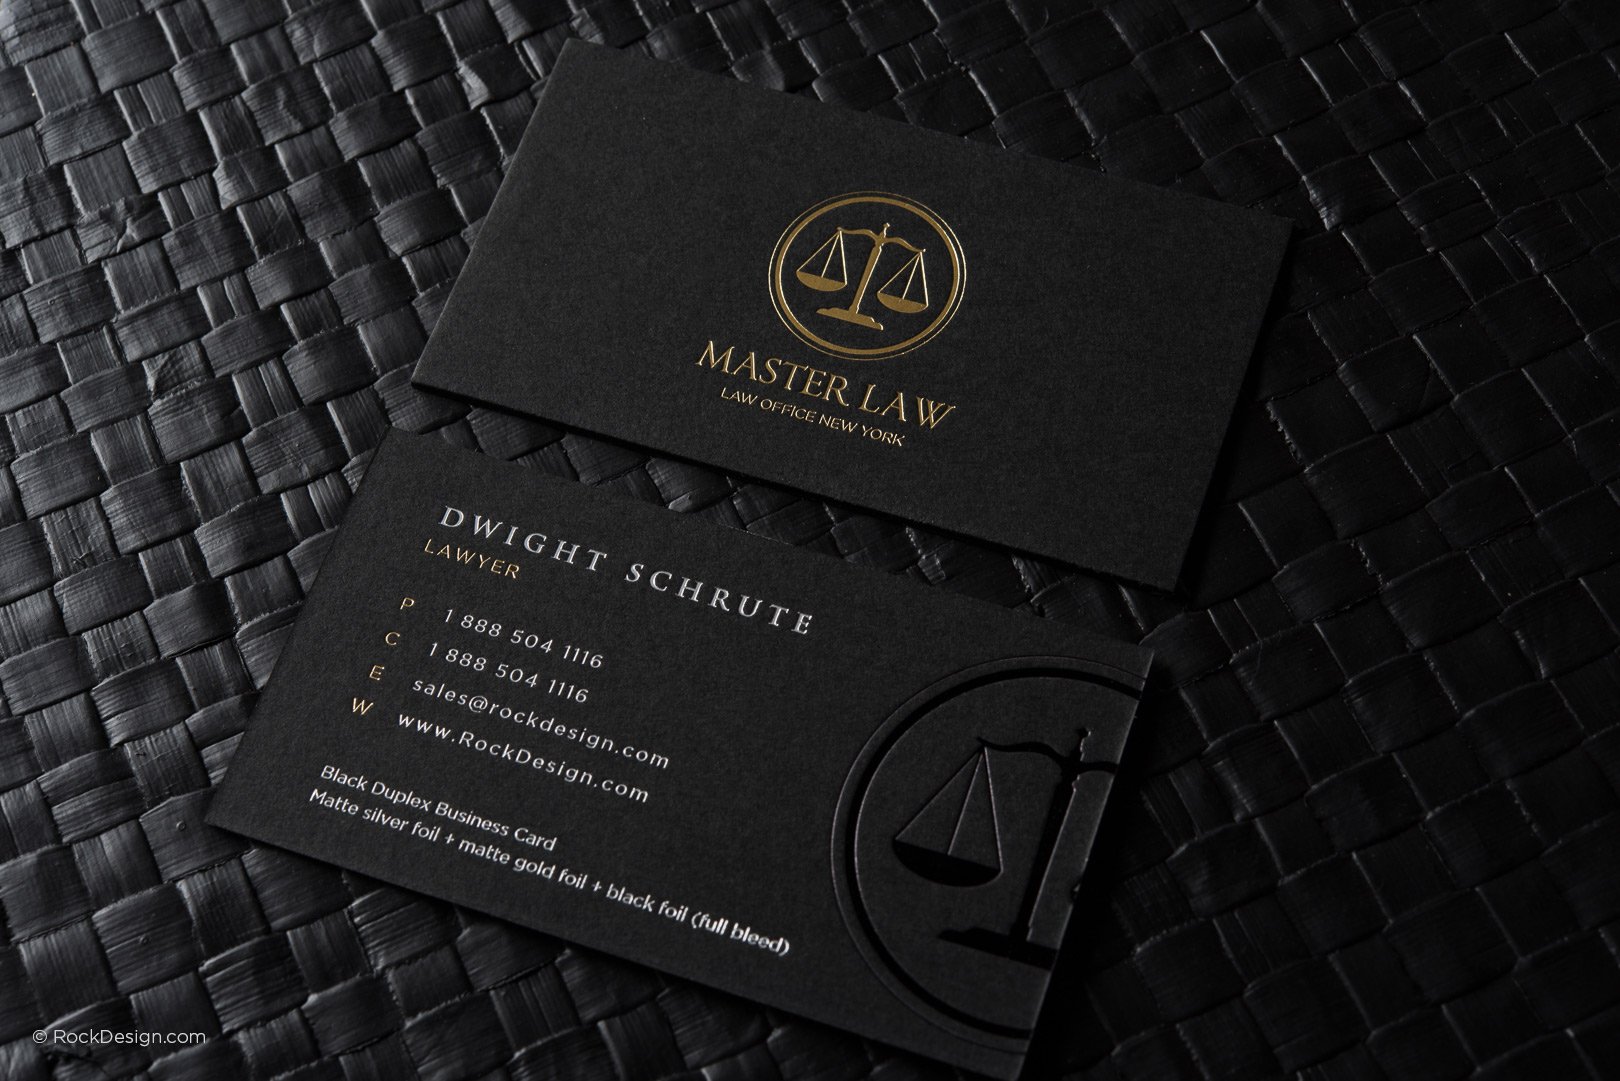 FREE Lawyer business card template | RockDesign.com